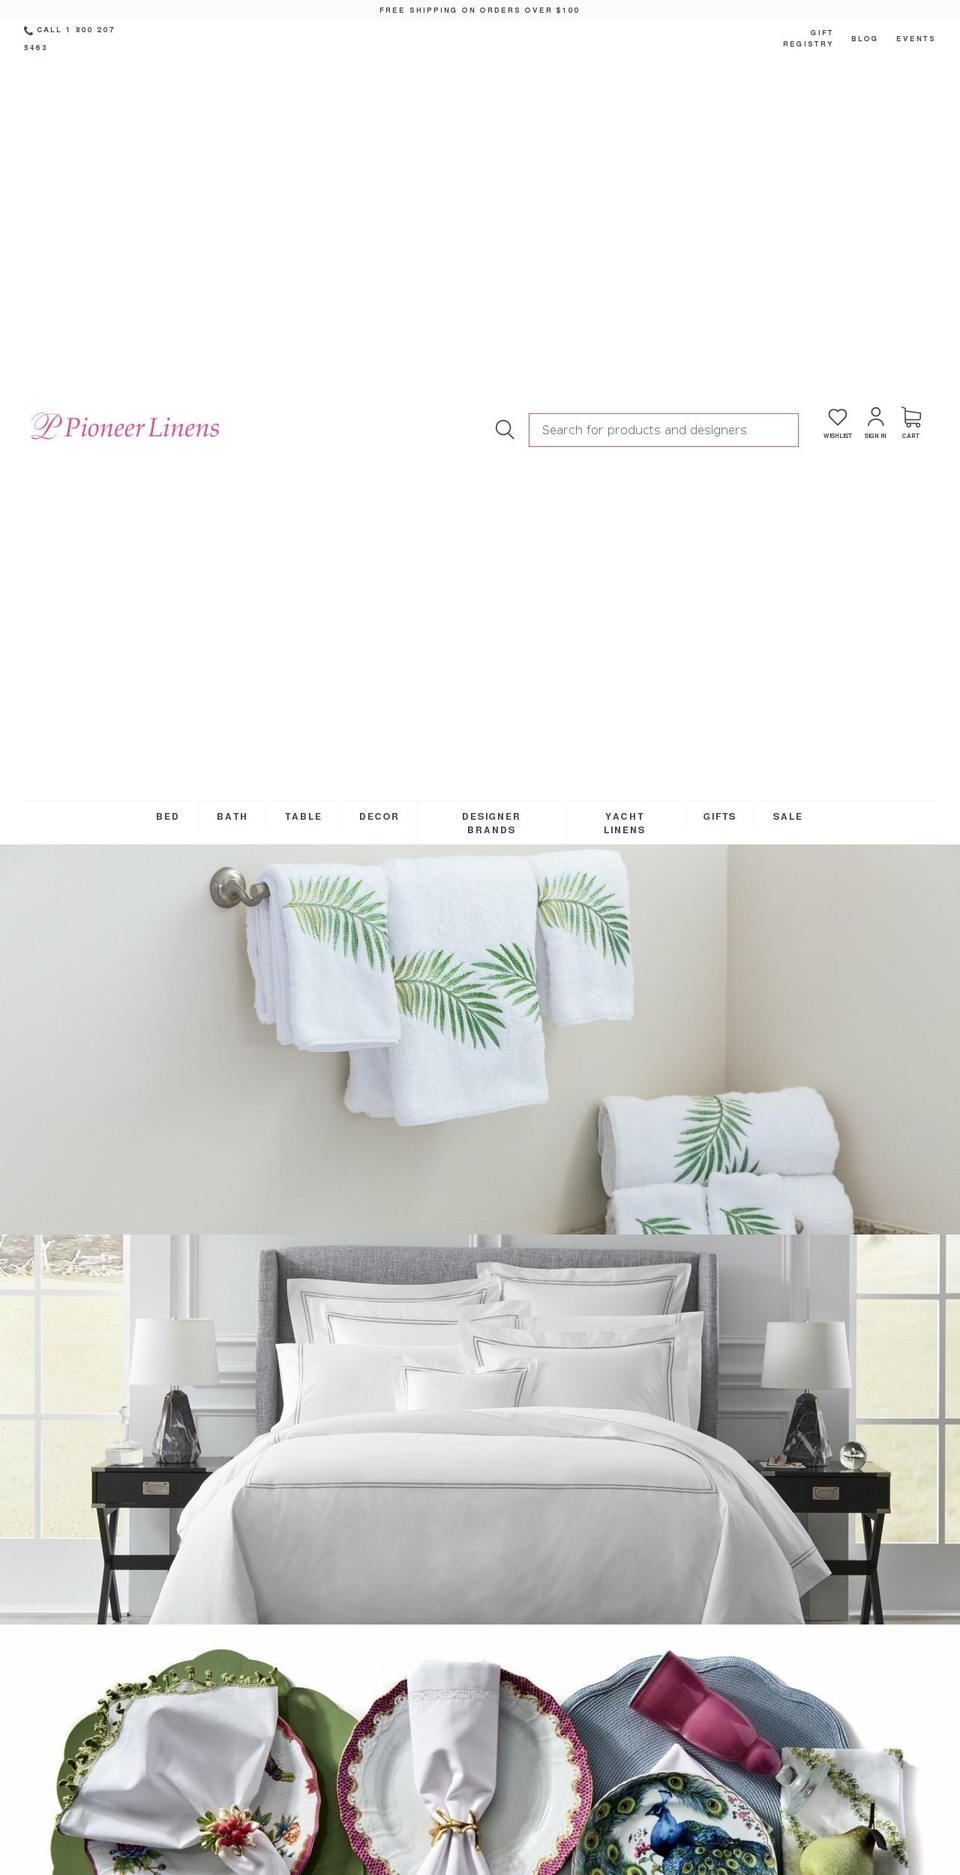 Buko Shopify Theme - Products Consolidation Shopify theme site example vberthsheets.com